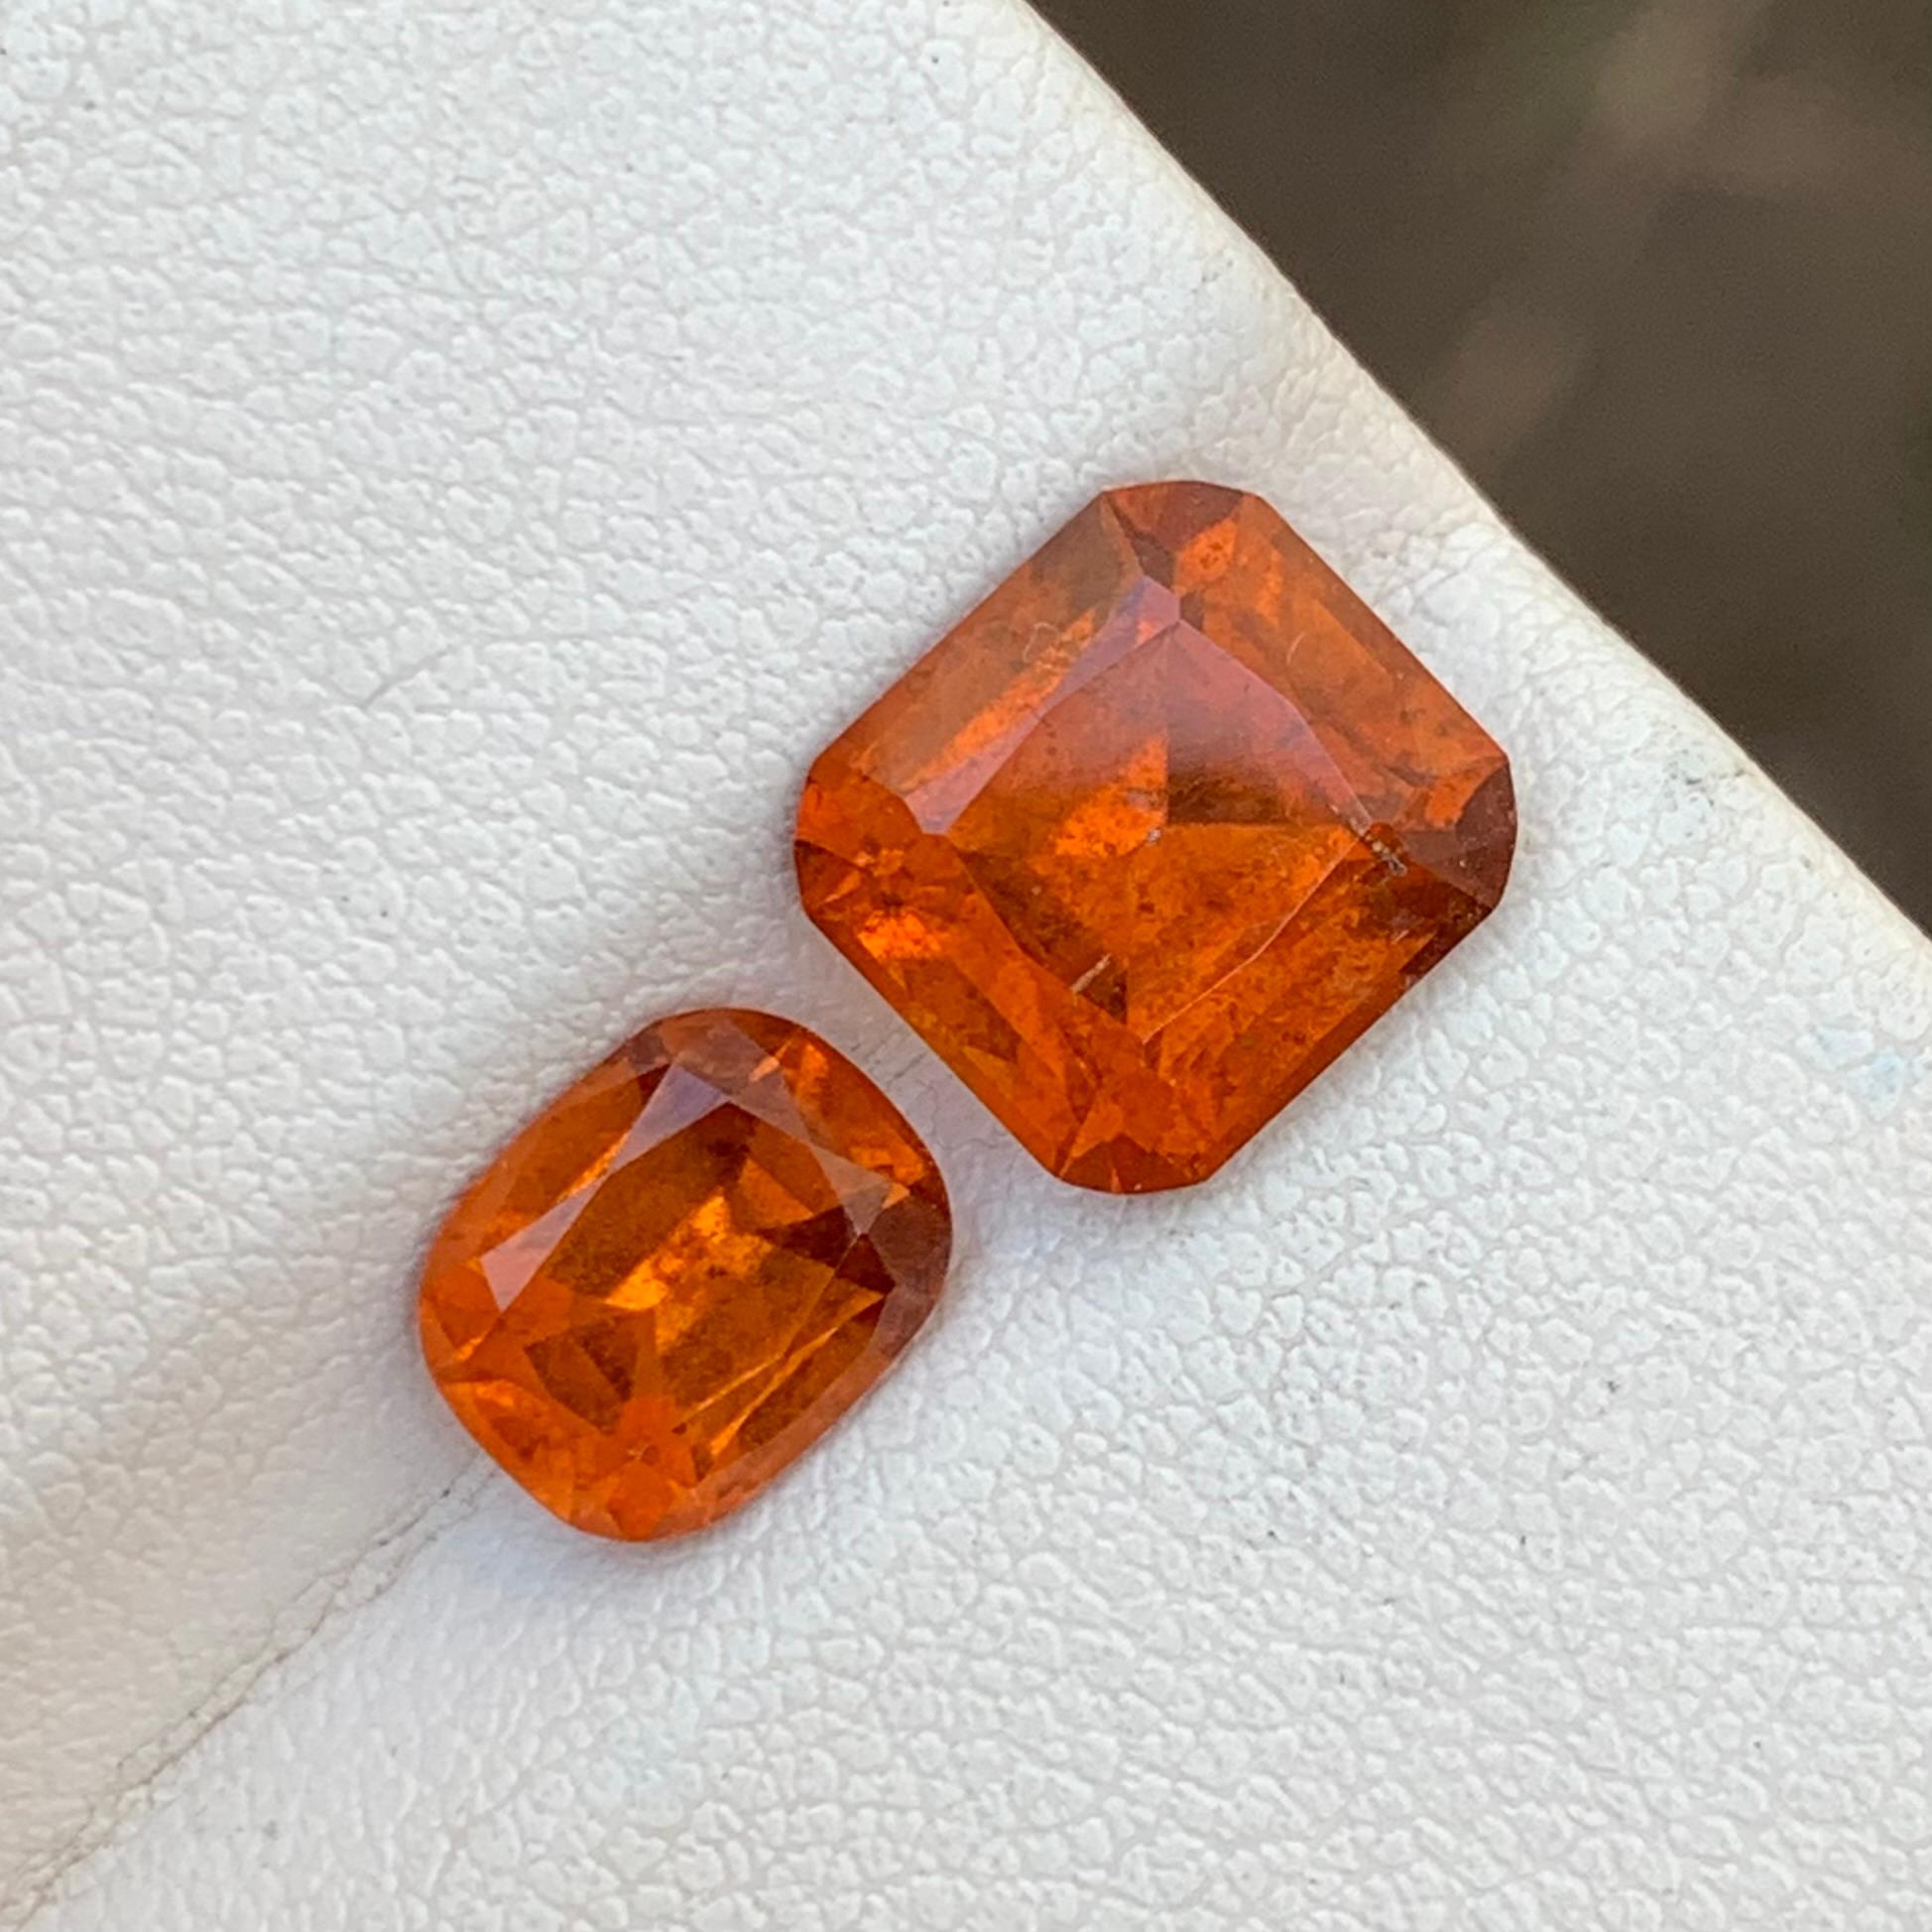 Anglo-indien 5.95 Carats Natural Loose Hessonite Garnet 2 Pieces For Ring Jewelry Making  en vente